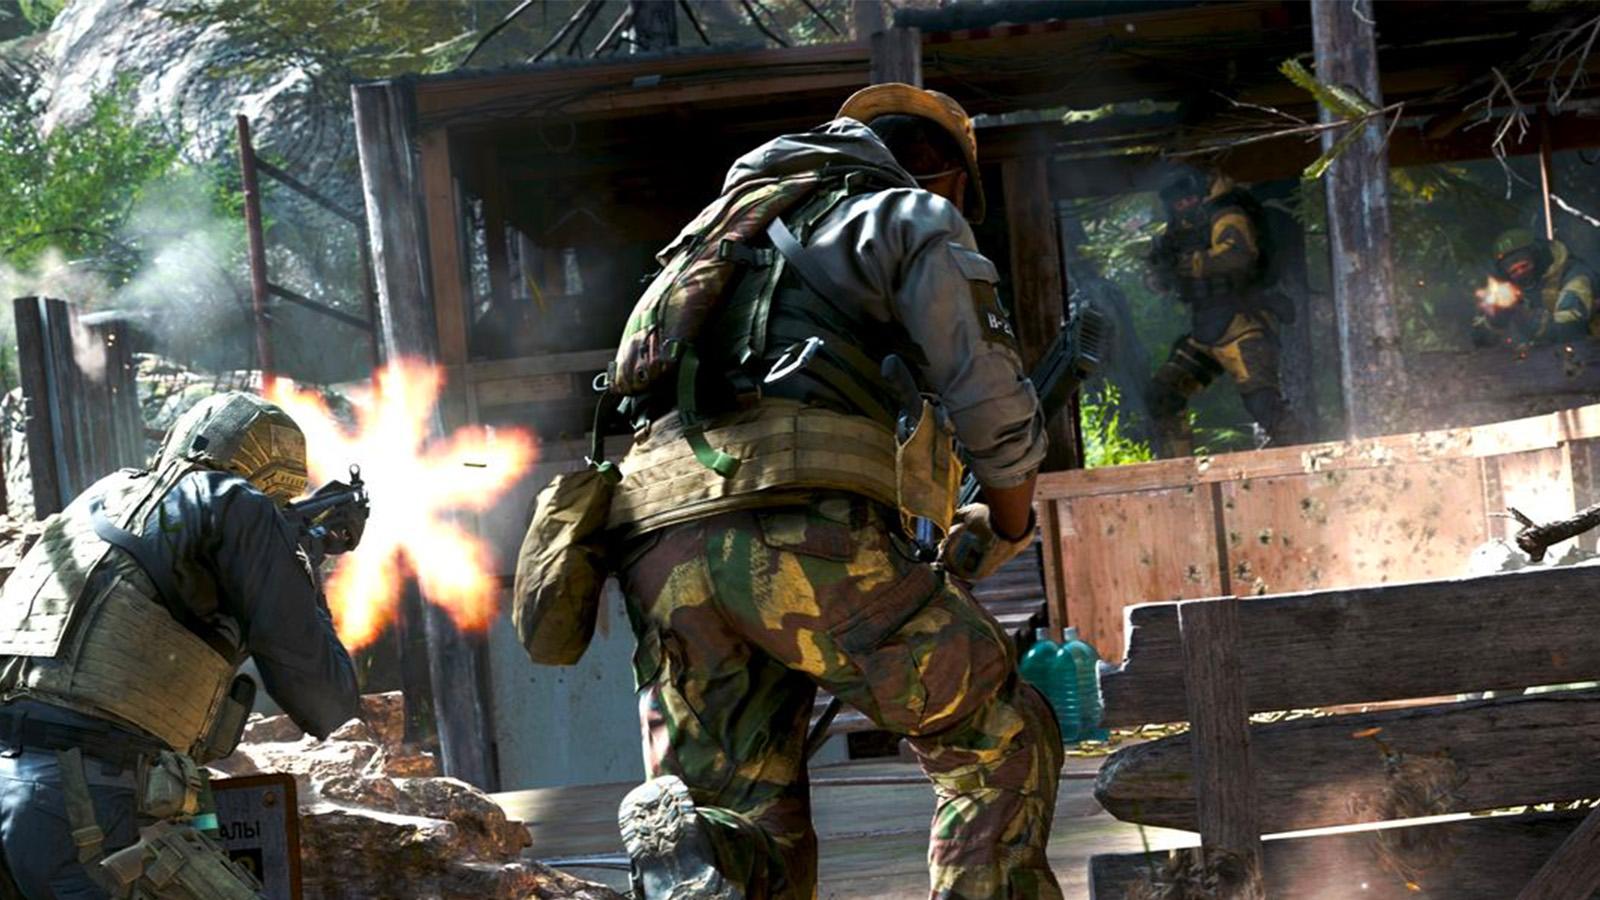 Modern Warfare 2 Remastered and a free-to-play CoD game are coming,  according to leaker - Dot Esports